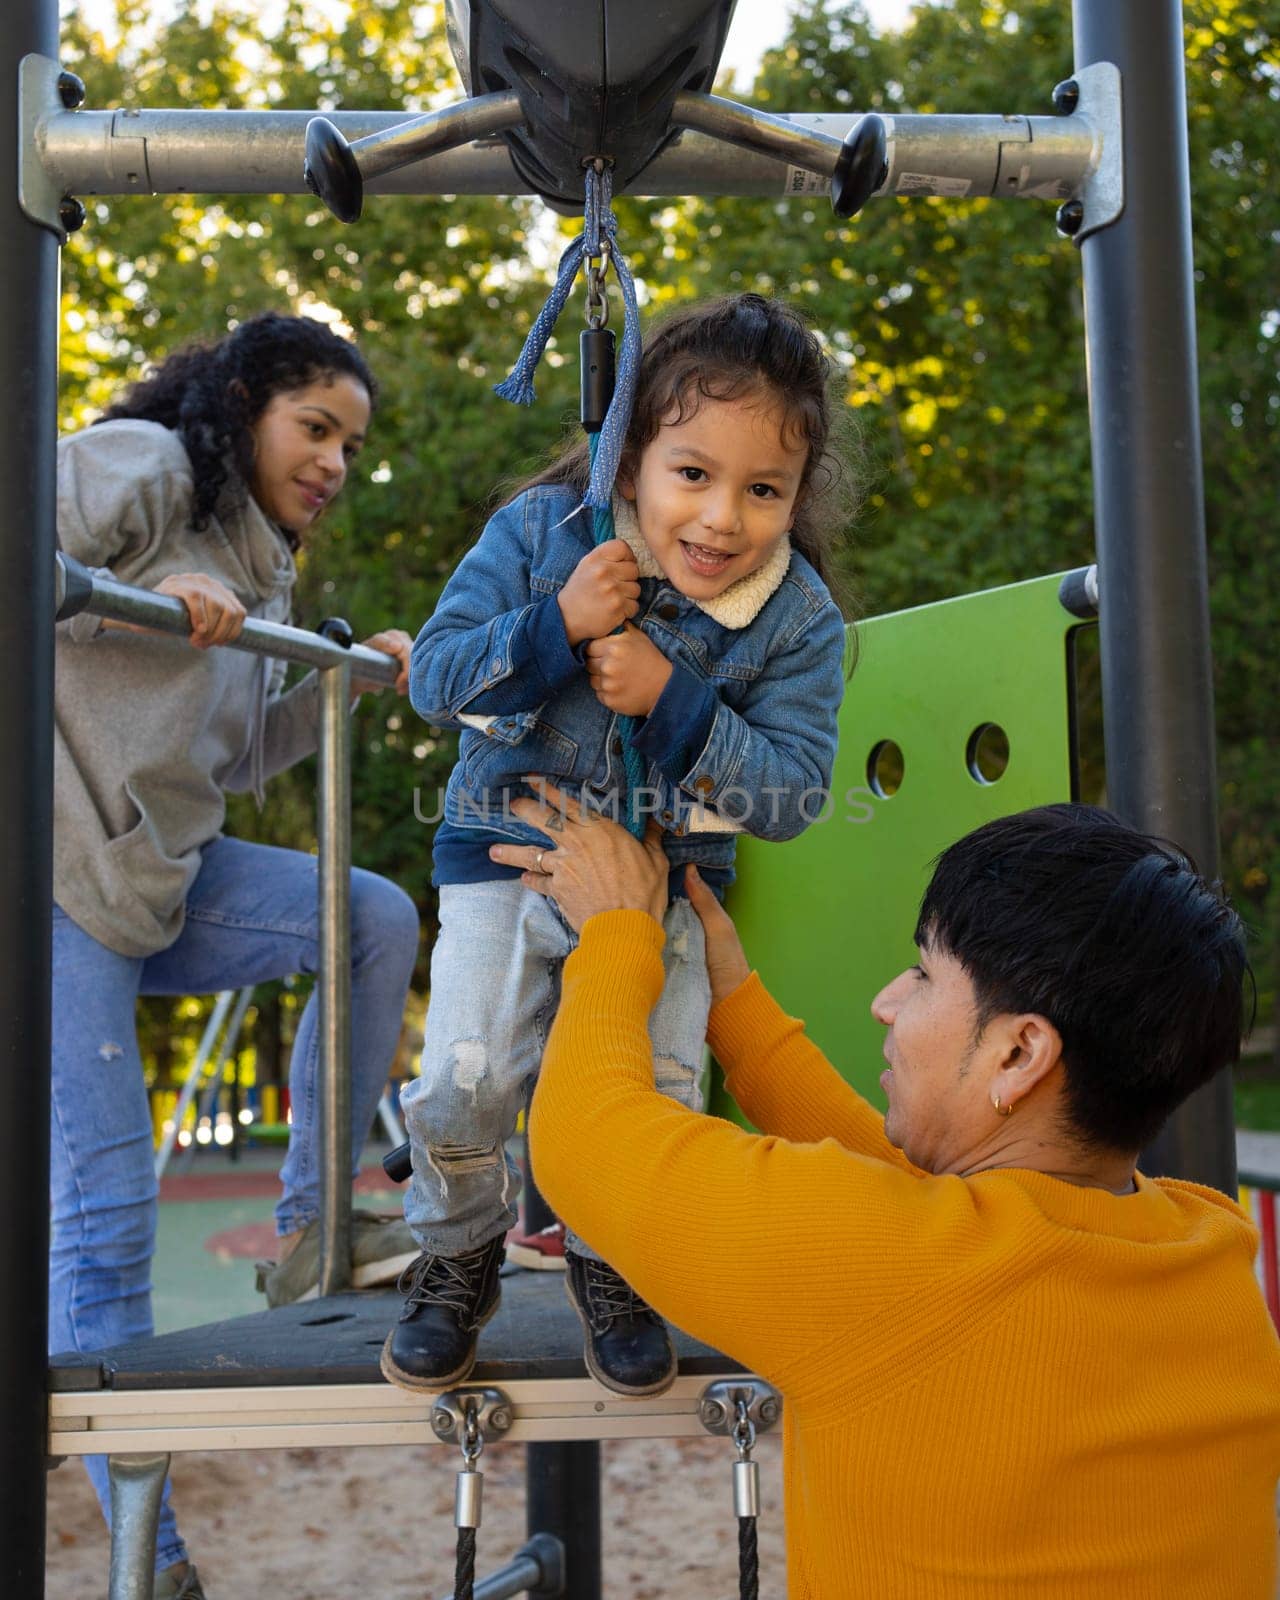 Latin family with a child playing in a playground. Father helping the kid to jump on a zipline.